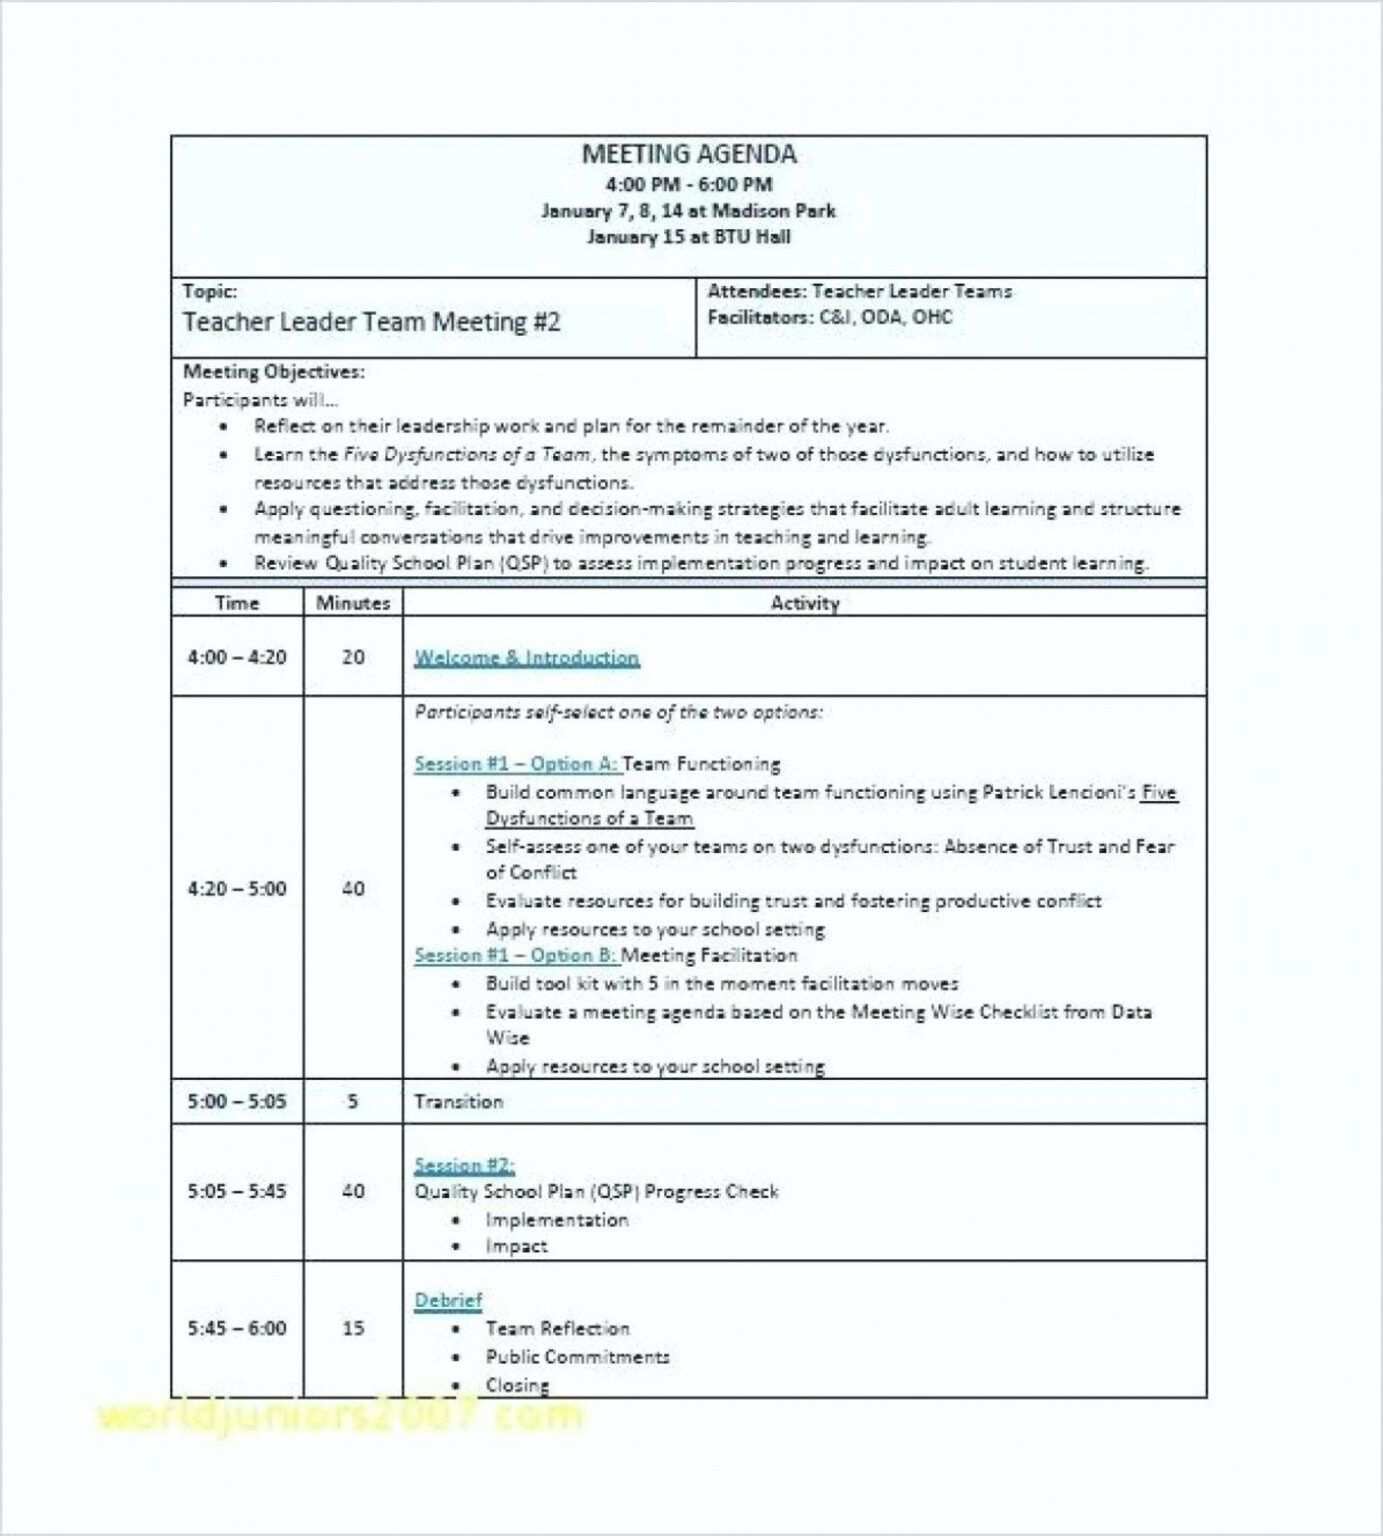 12 13 Word Agenda Vorlage Fur Meetings Ithacar Within Event Agenda Template Word Meeting Notes Template Meeting Agenda Template Meeting Agenda